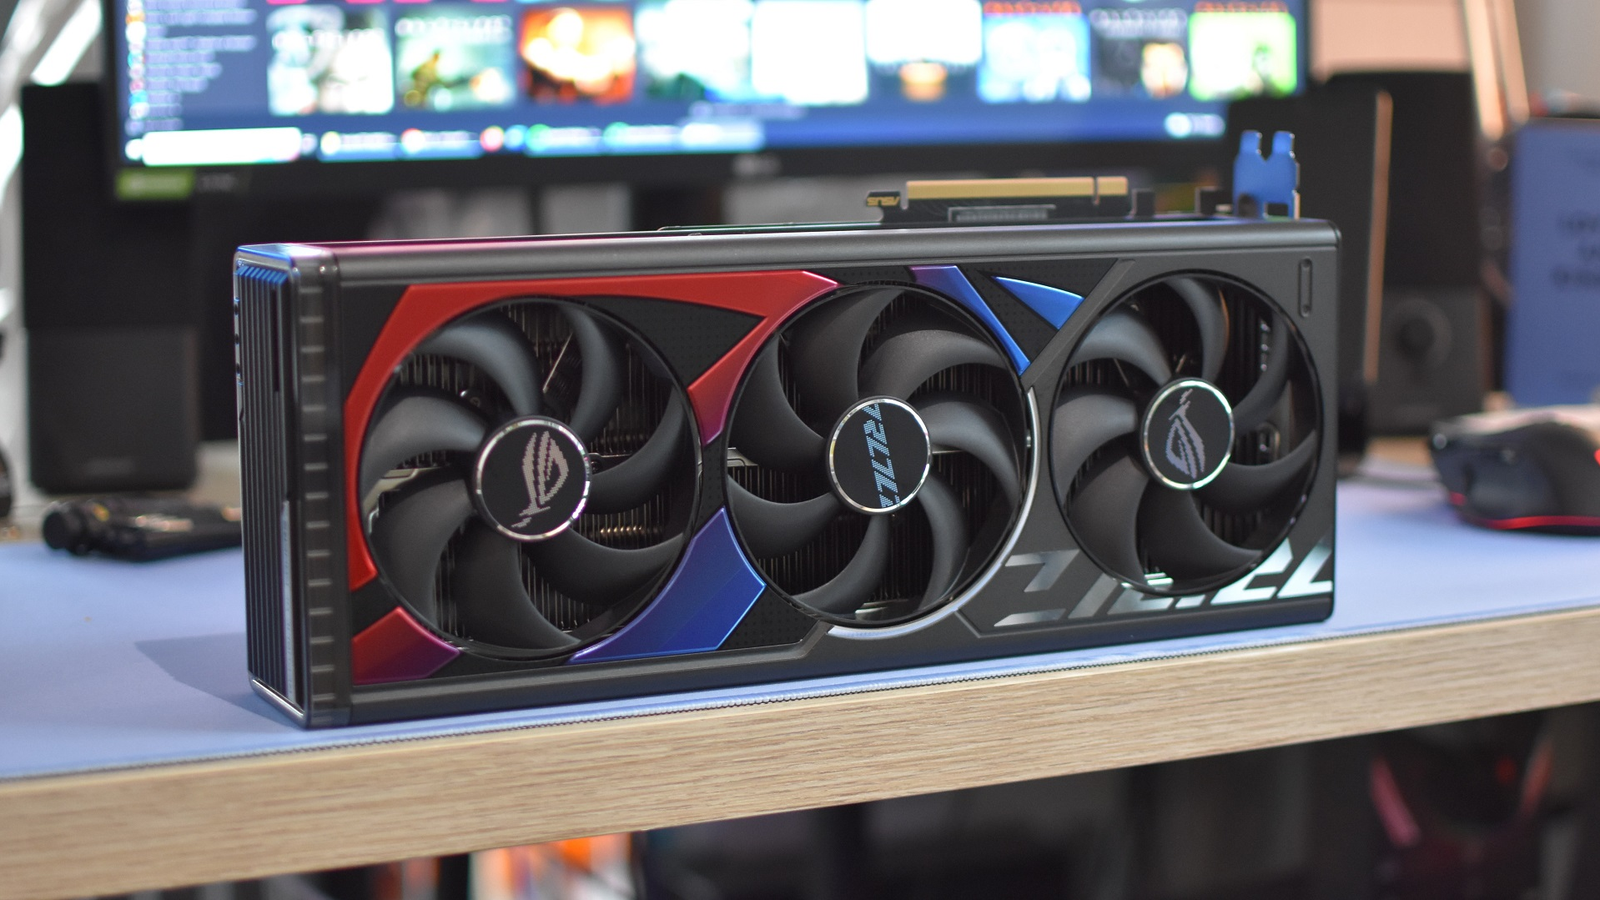 Nvidia GeForce RTX 4080 Super review: new price, familiar